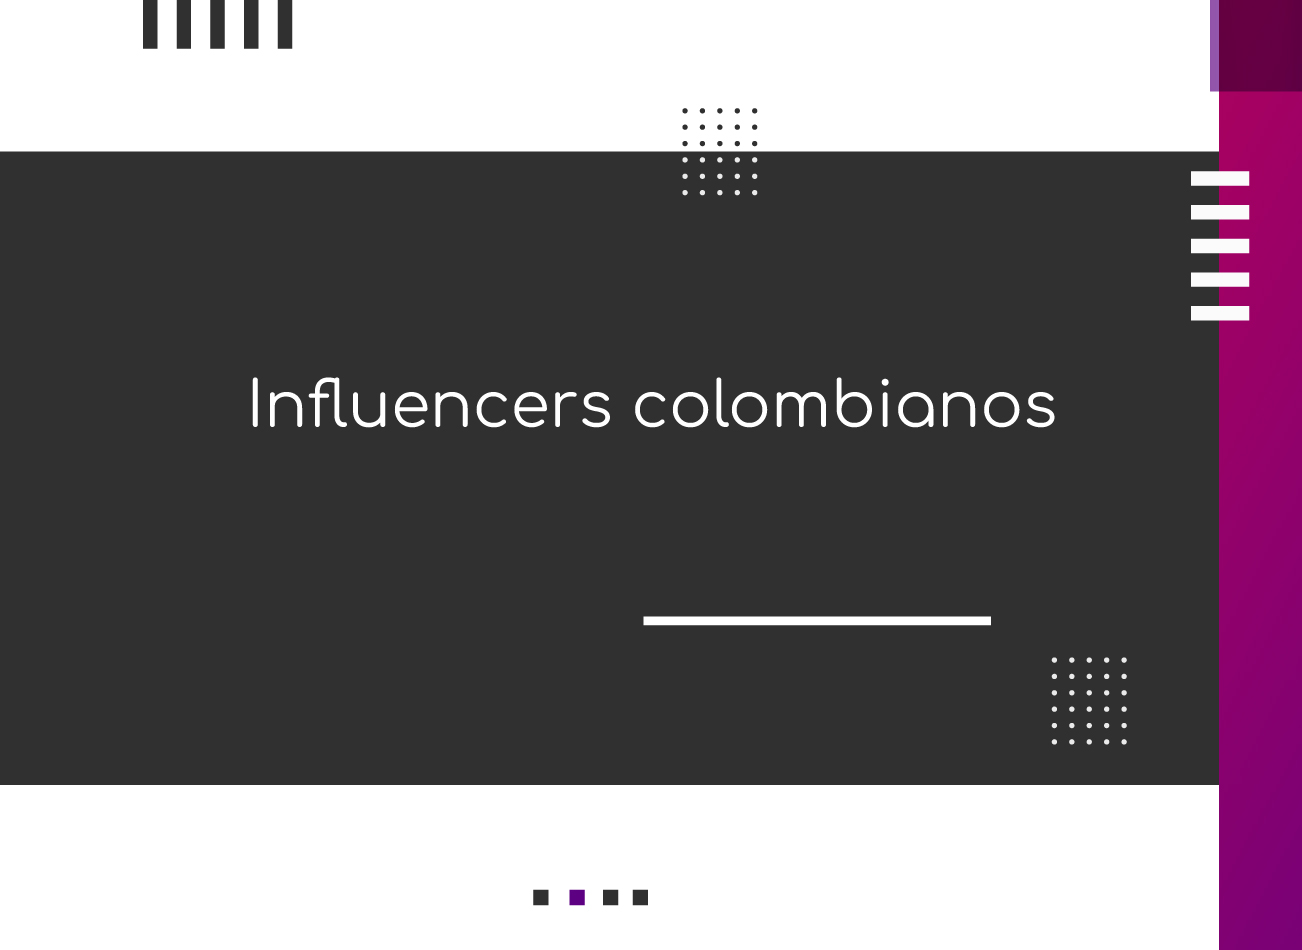 Influencers colombianos